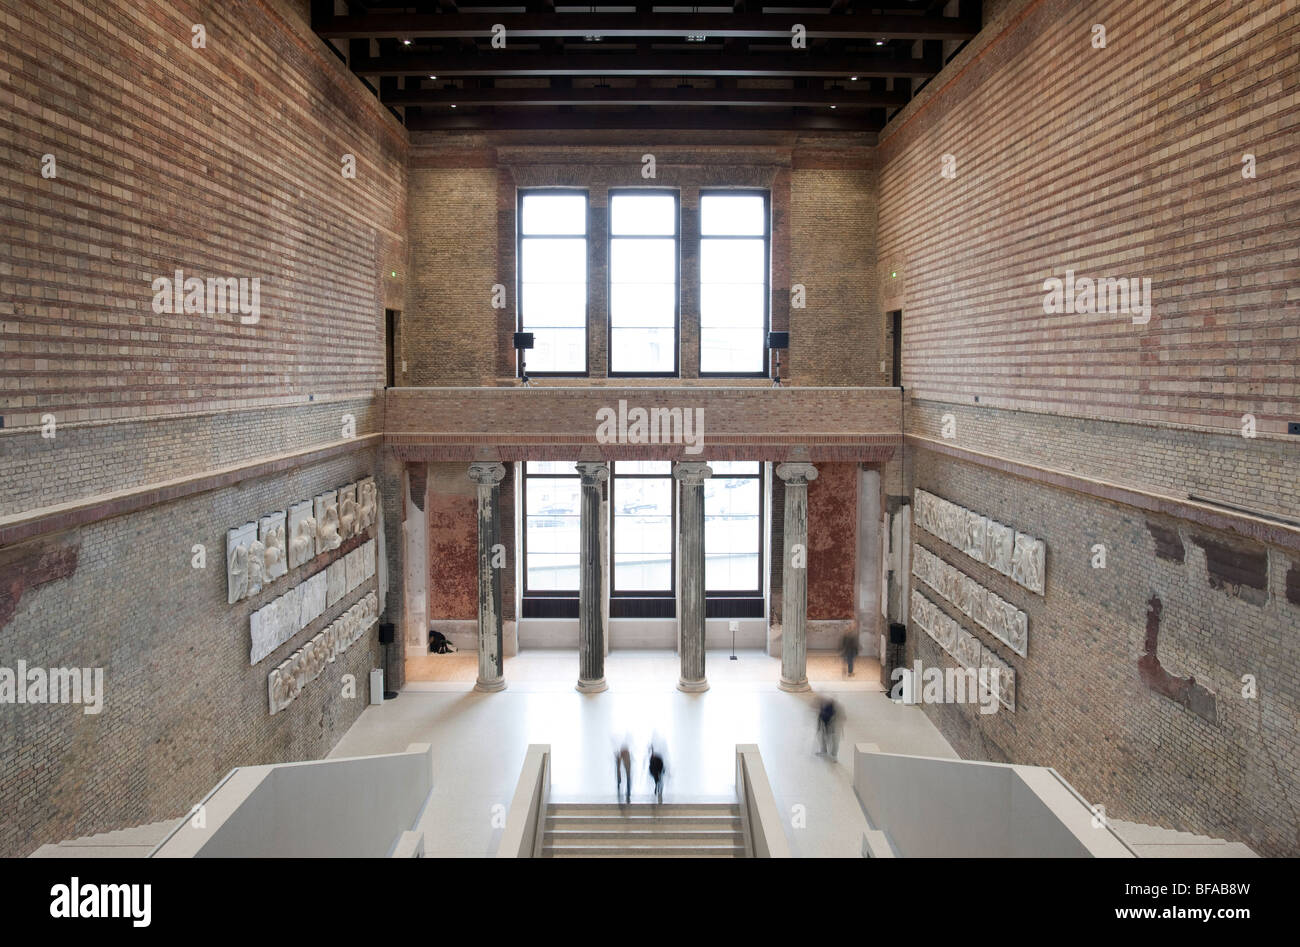 Stairhall - New Museum in Berlin Germany Stock Photo